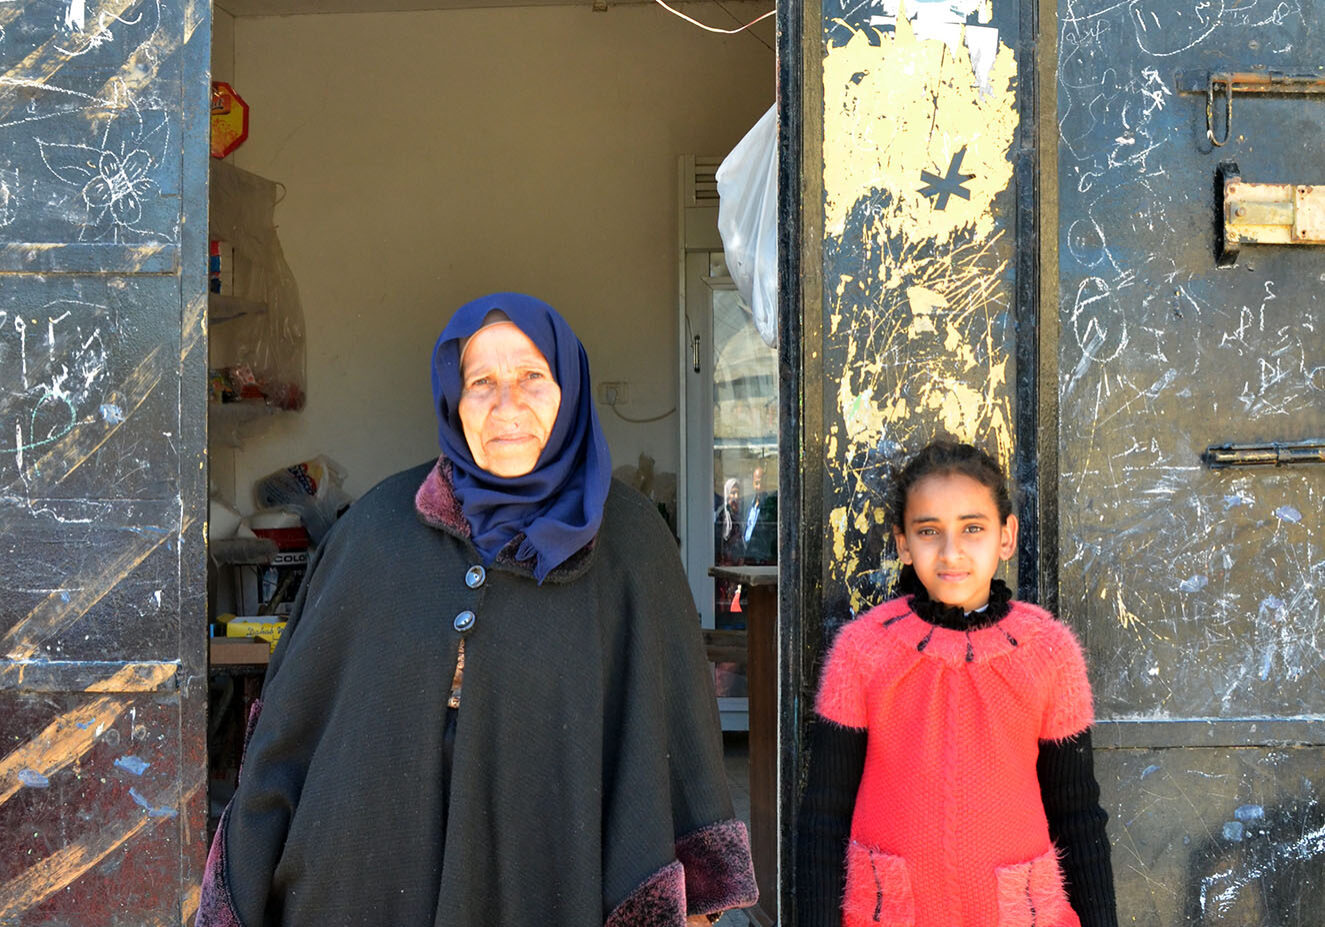 Haja Suhaila and her granddaughter Hala infront of their shop.